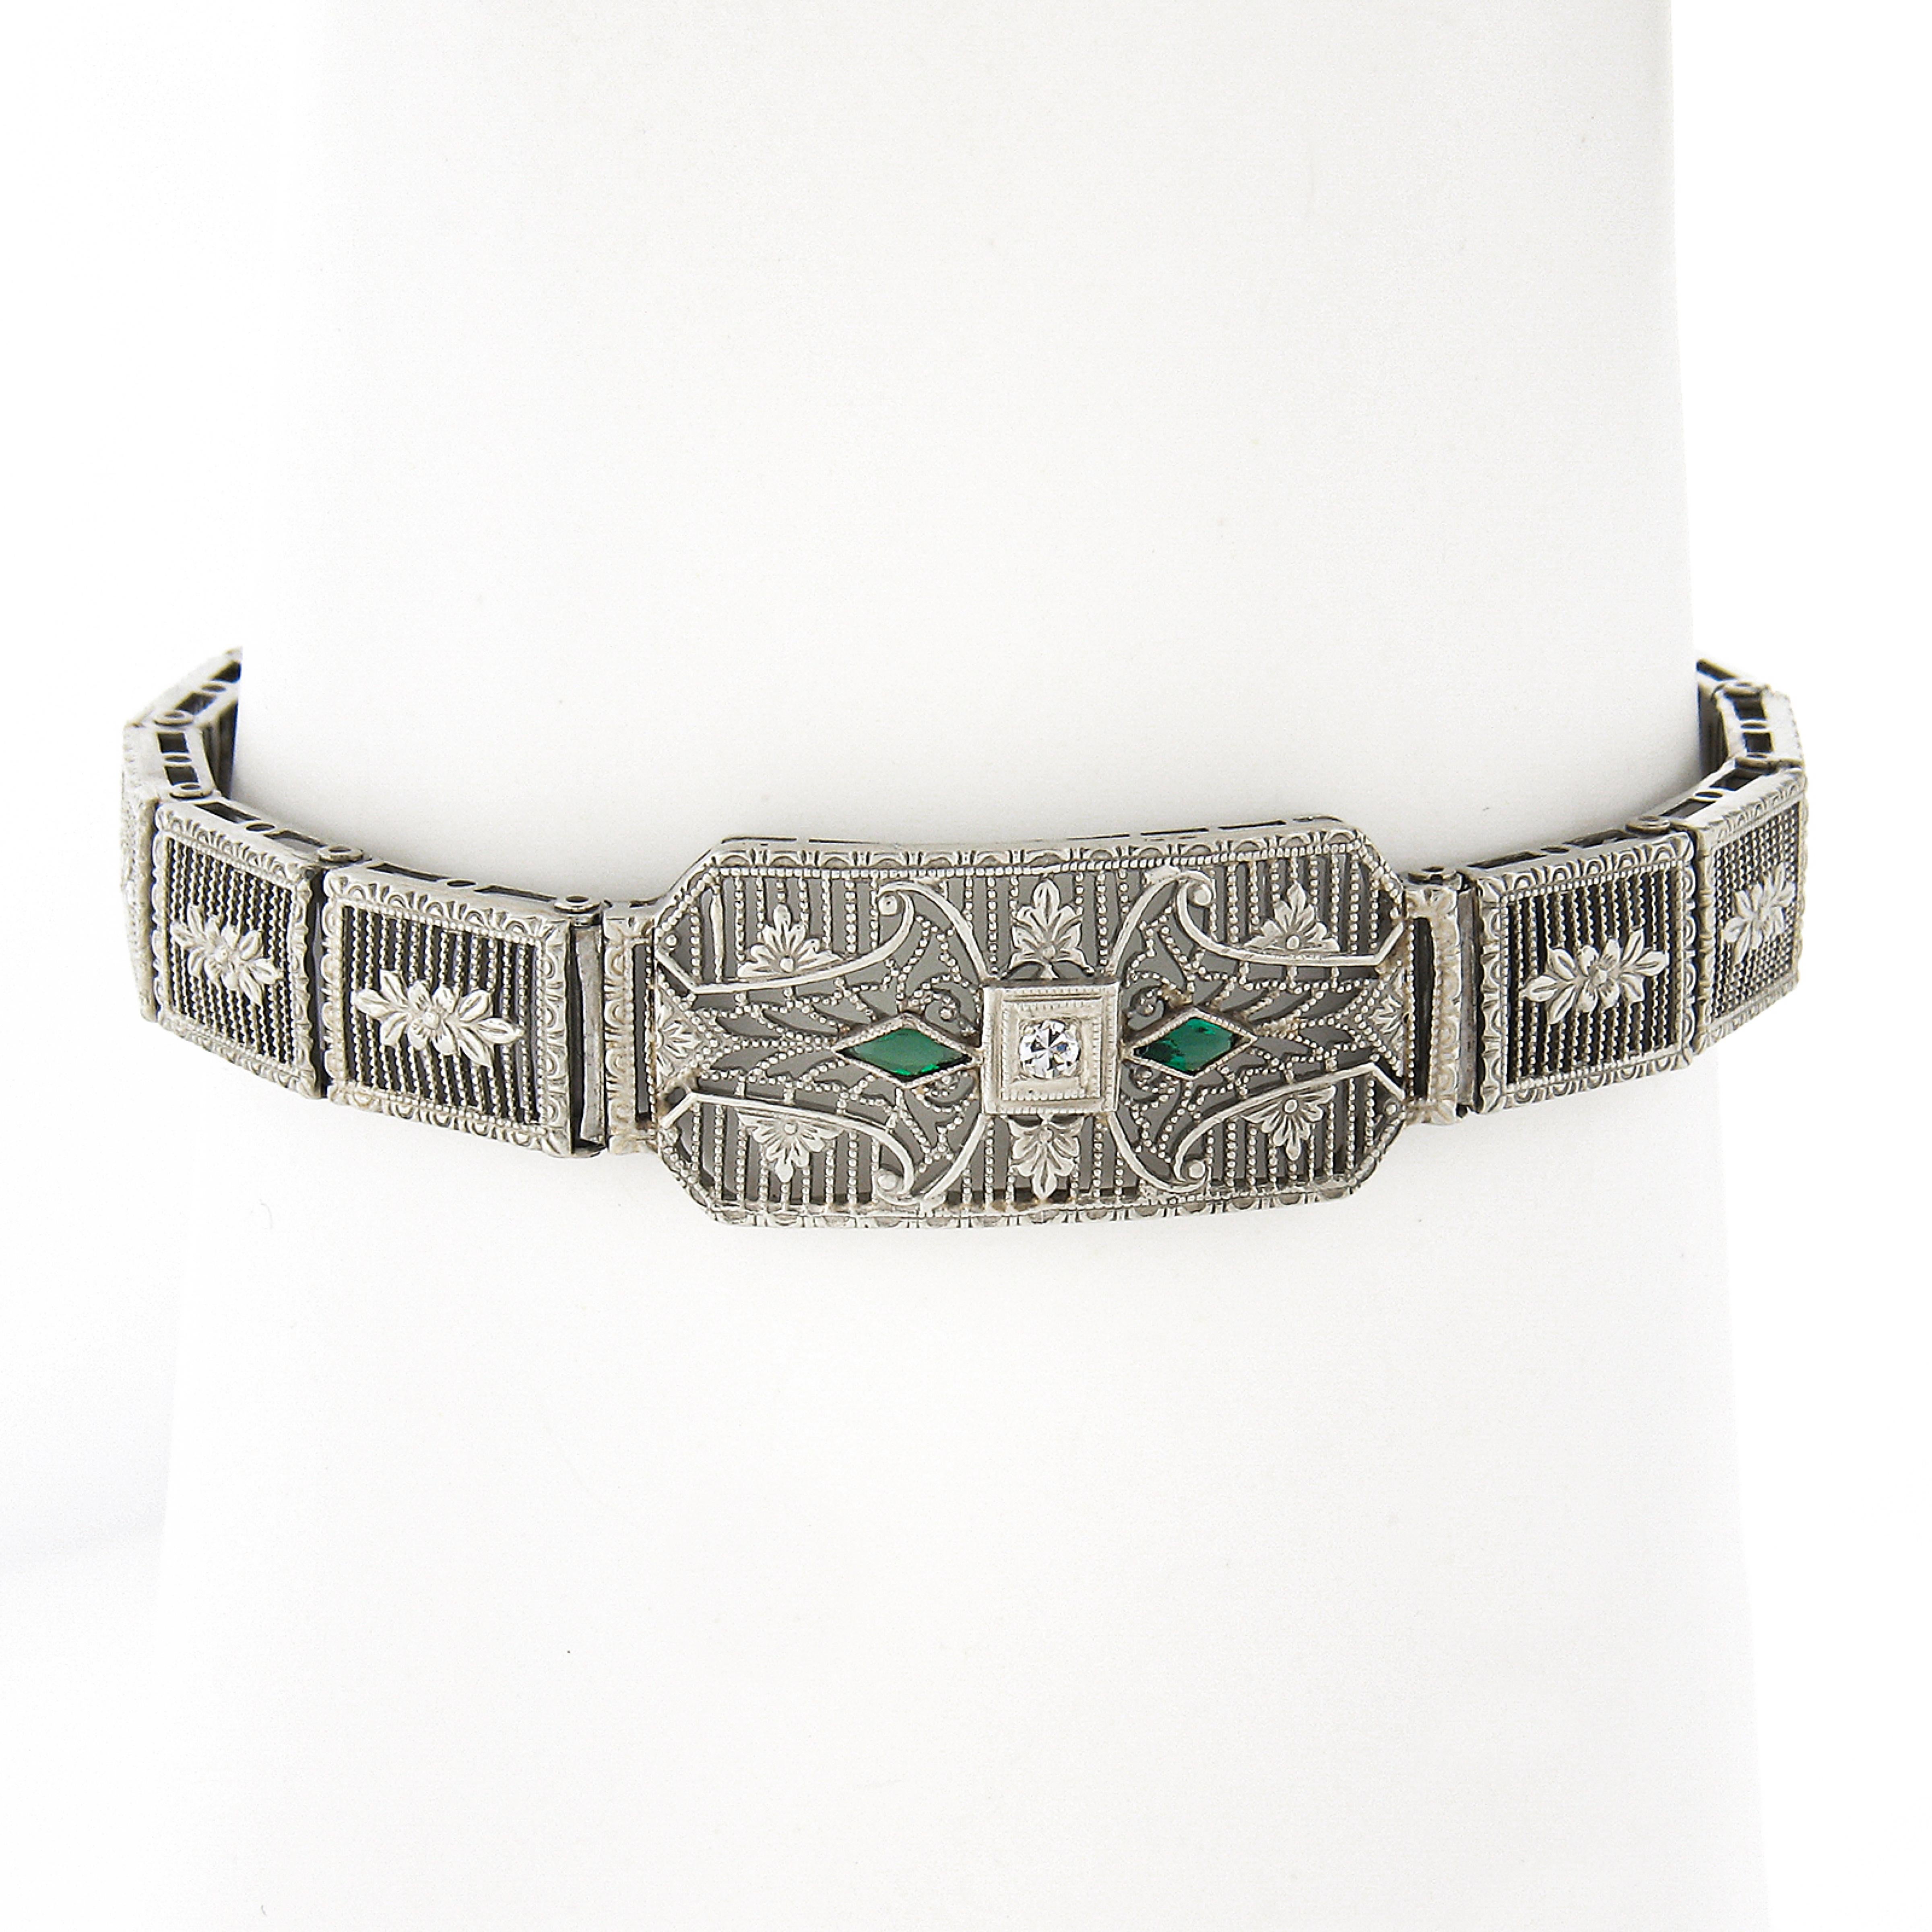 Here we have a magnificent antique belly link bracelet crafted from solid 10k white gold during the art deco period. The bracelet is completely covered with outstanding open filigree work and etched floral designs throughout, featuring a wide piece